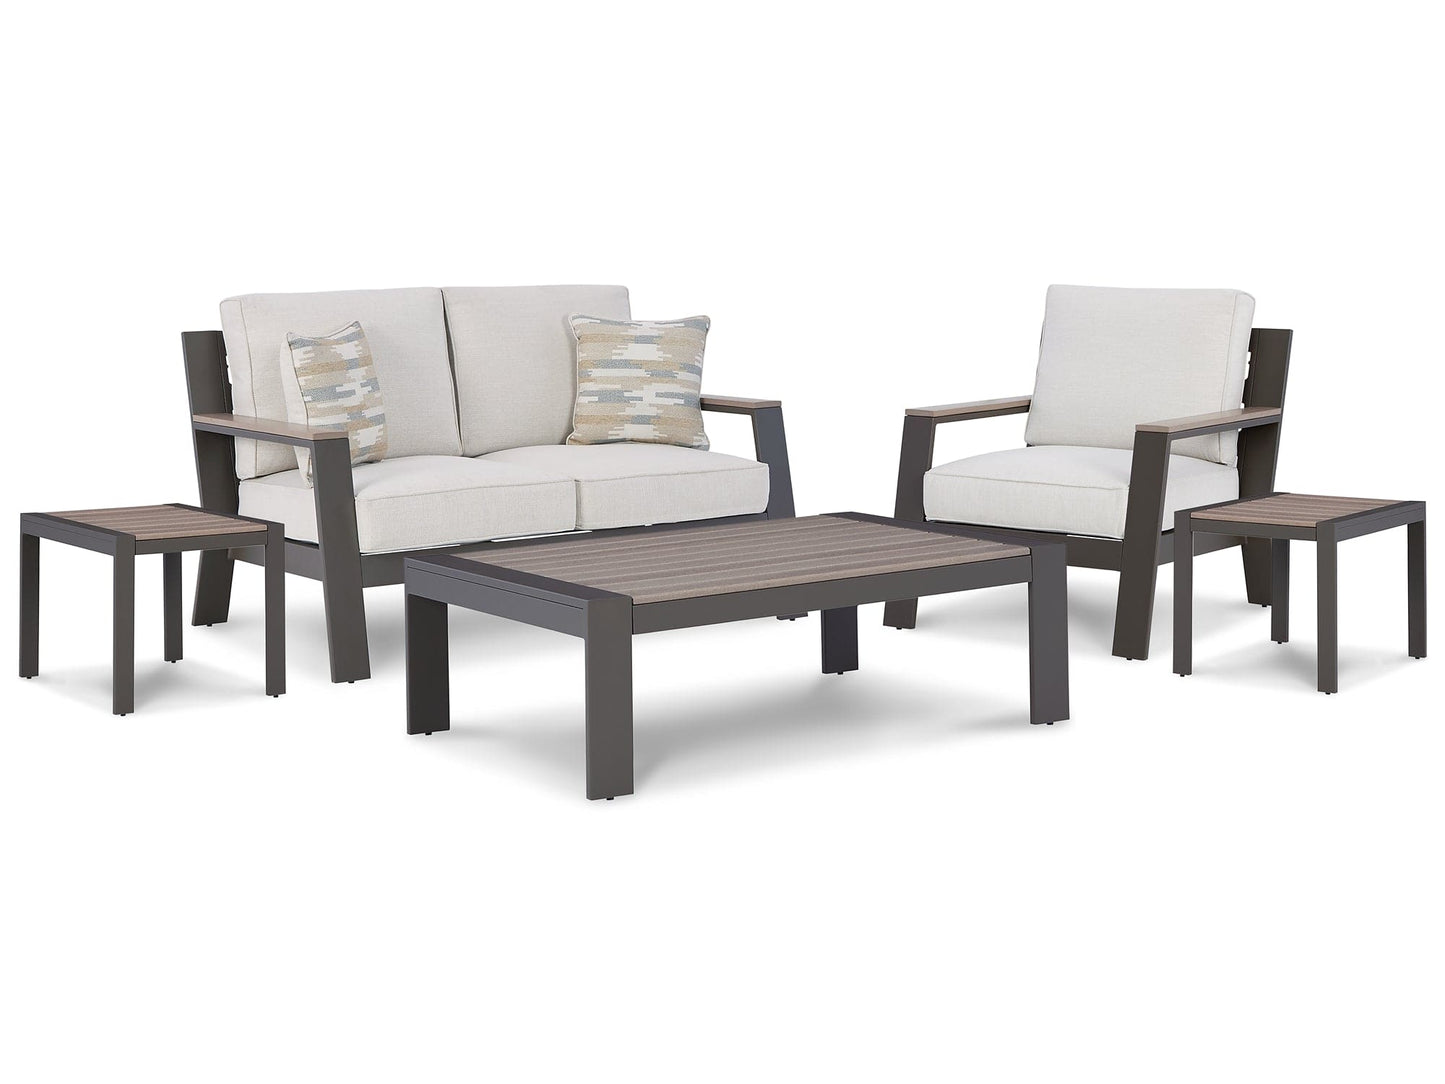 Ashley Express - Tropicava Outdoor Loveseat and Lounge Chair with Coffee Table and 2 End Tables